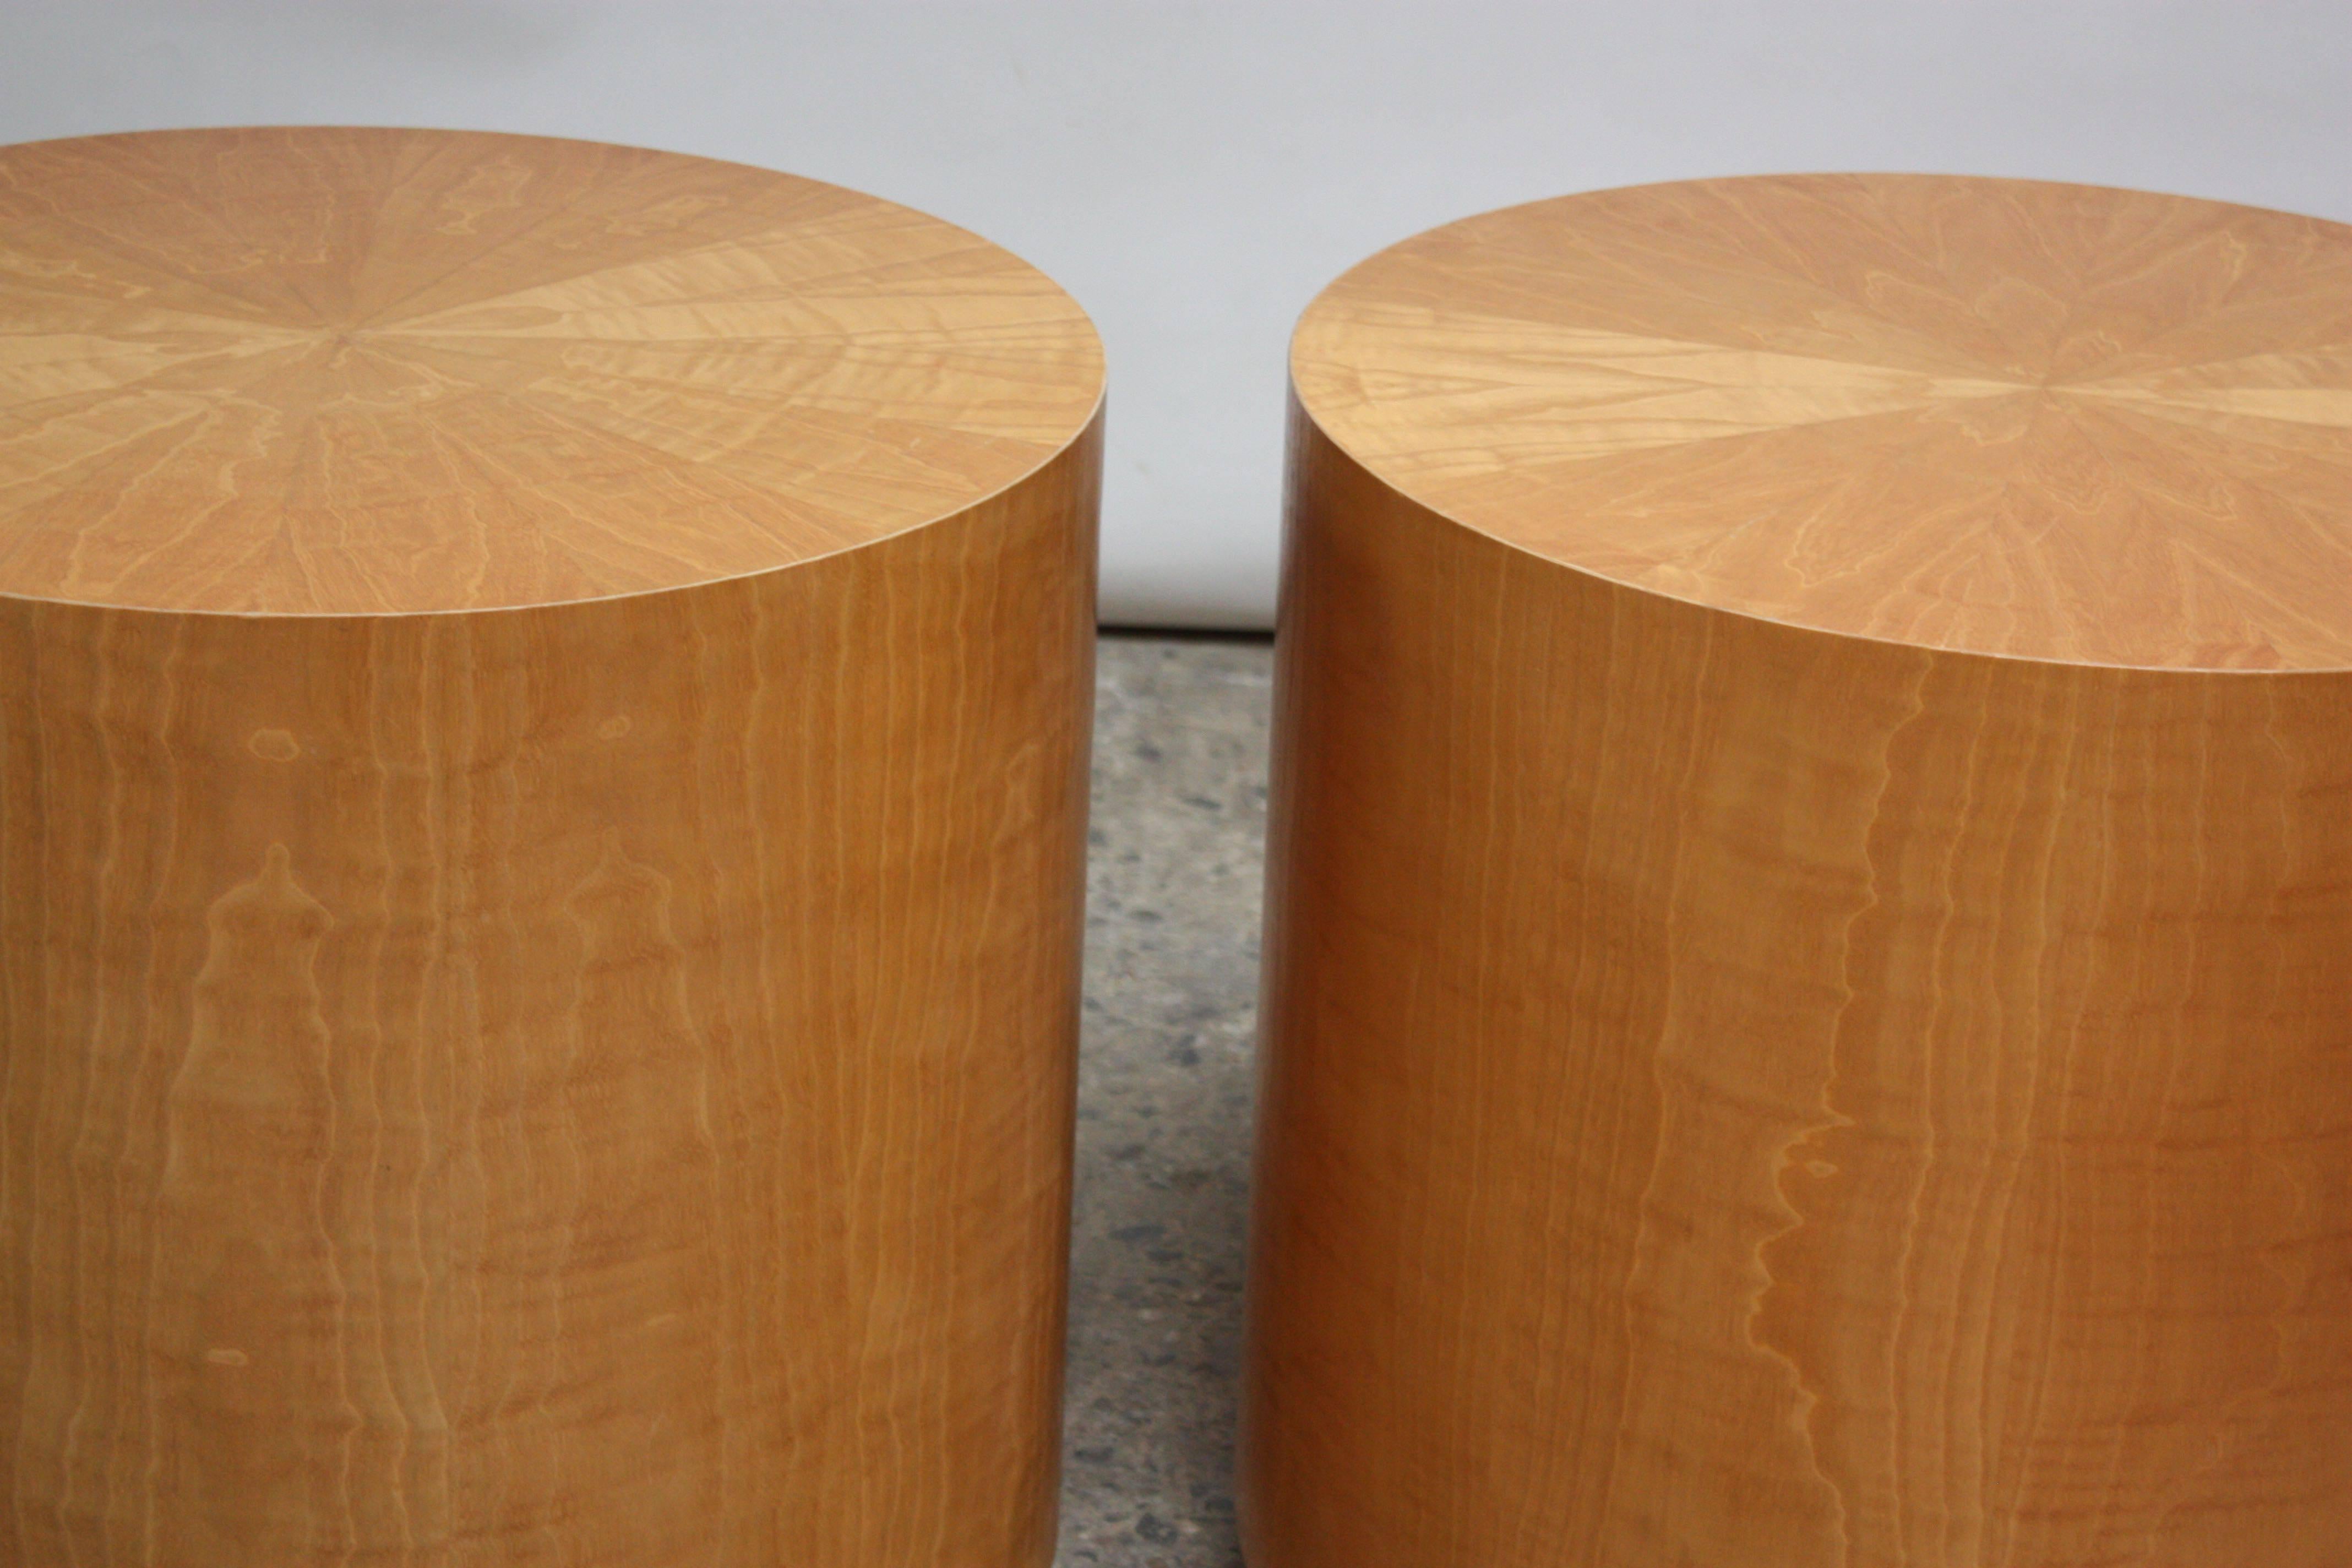 Birdseye Maple Pair of Large Bookmatched Bird's-Eye Maple Drum Tables